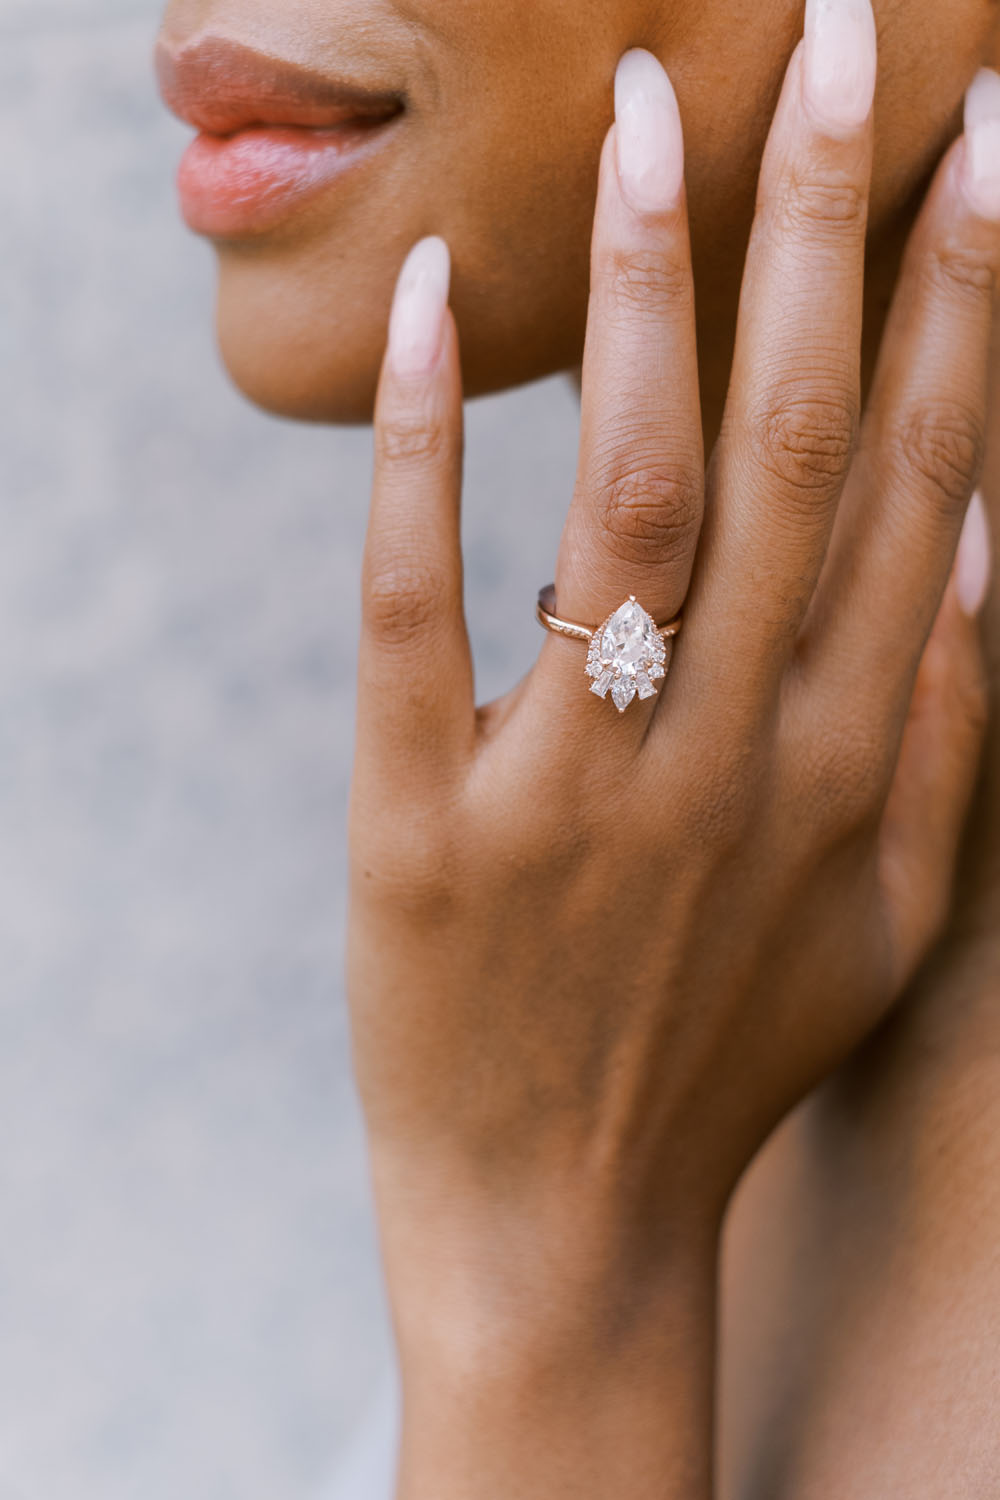 intern knal gemiddelde Unique Non Traditional Engagement Rings with No Diamond